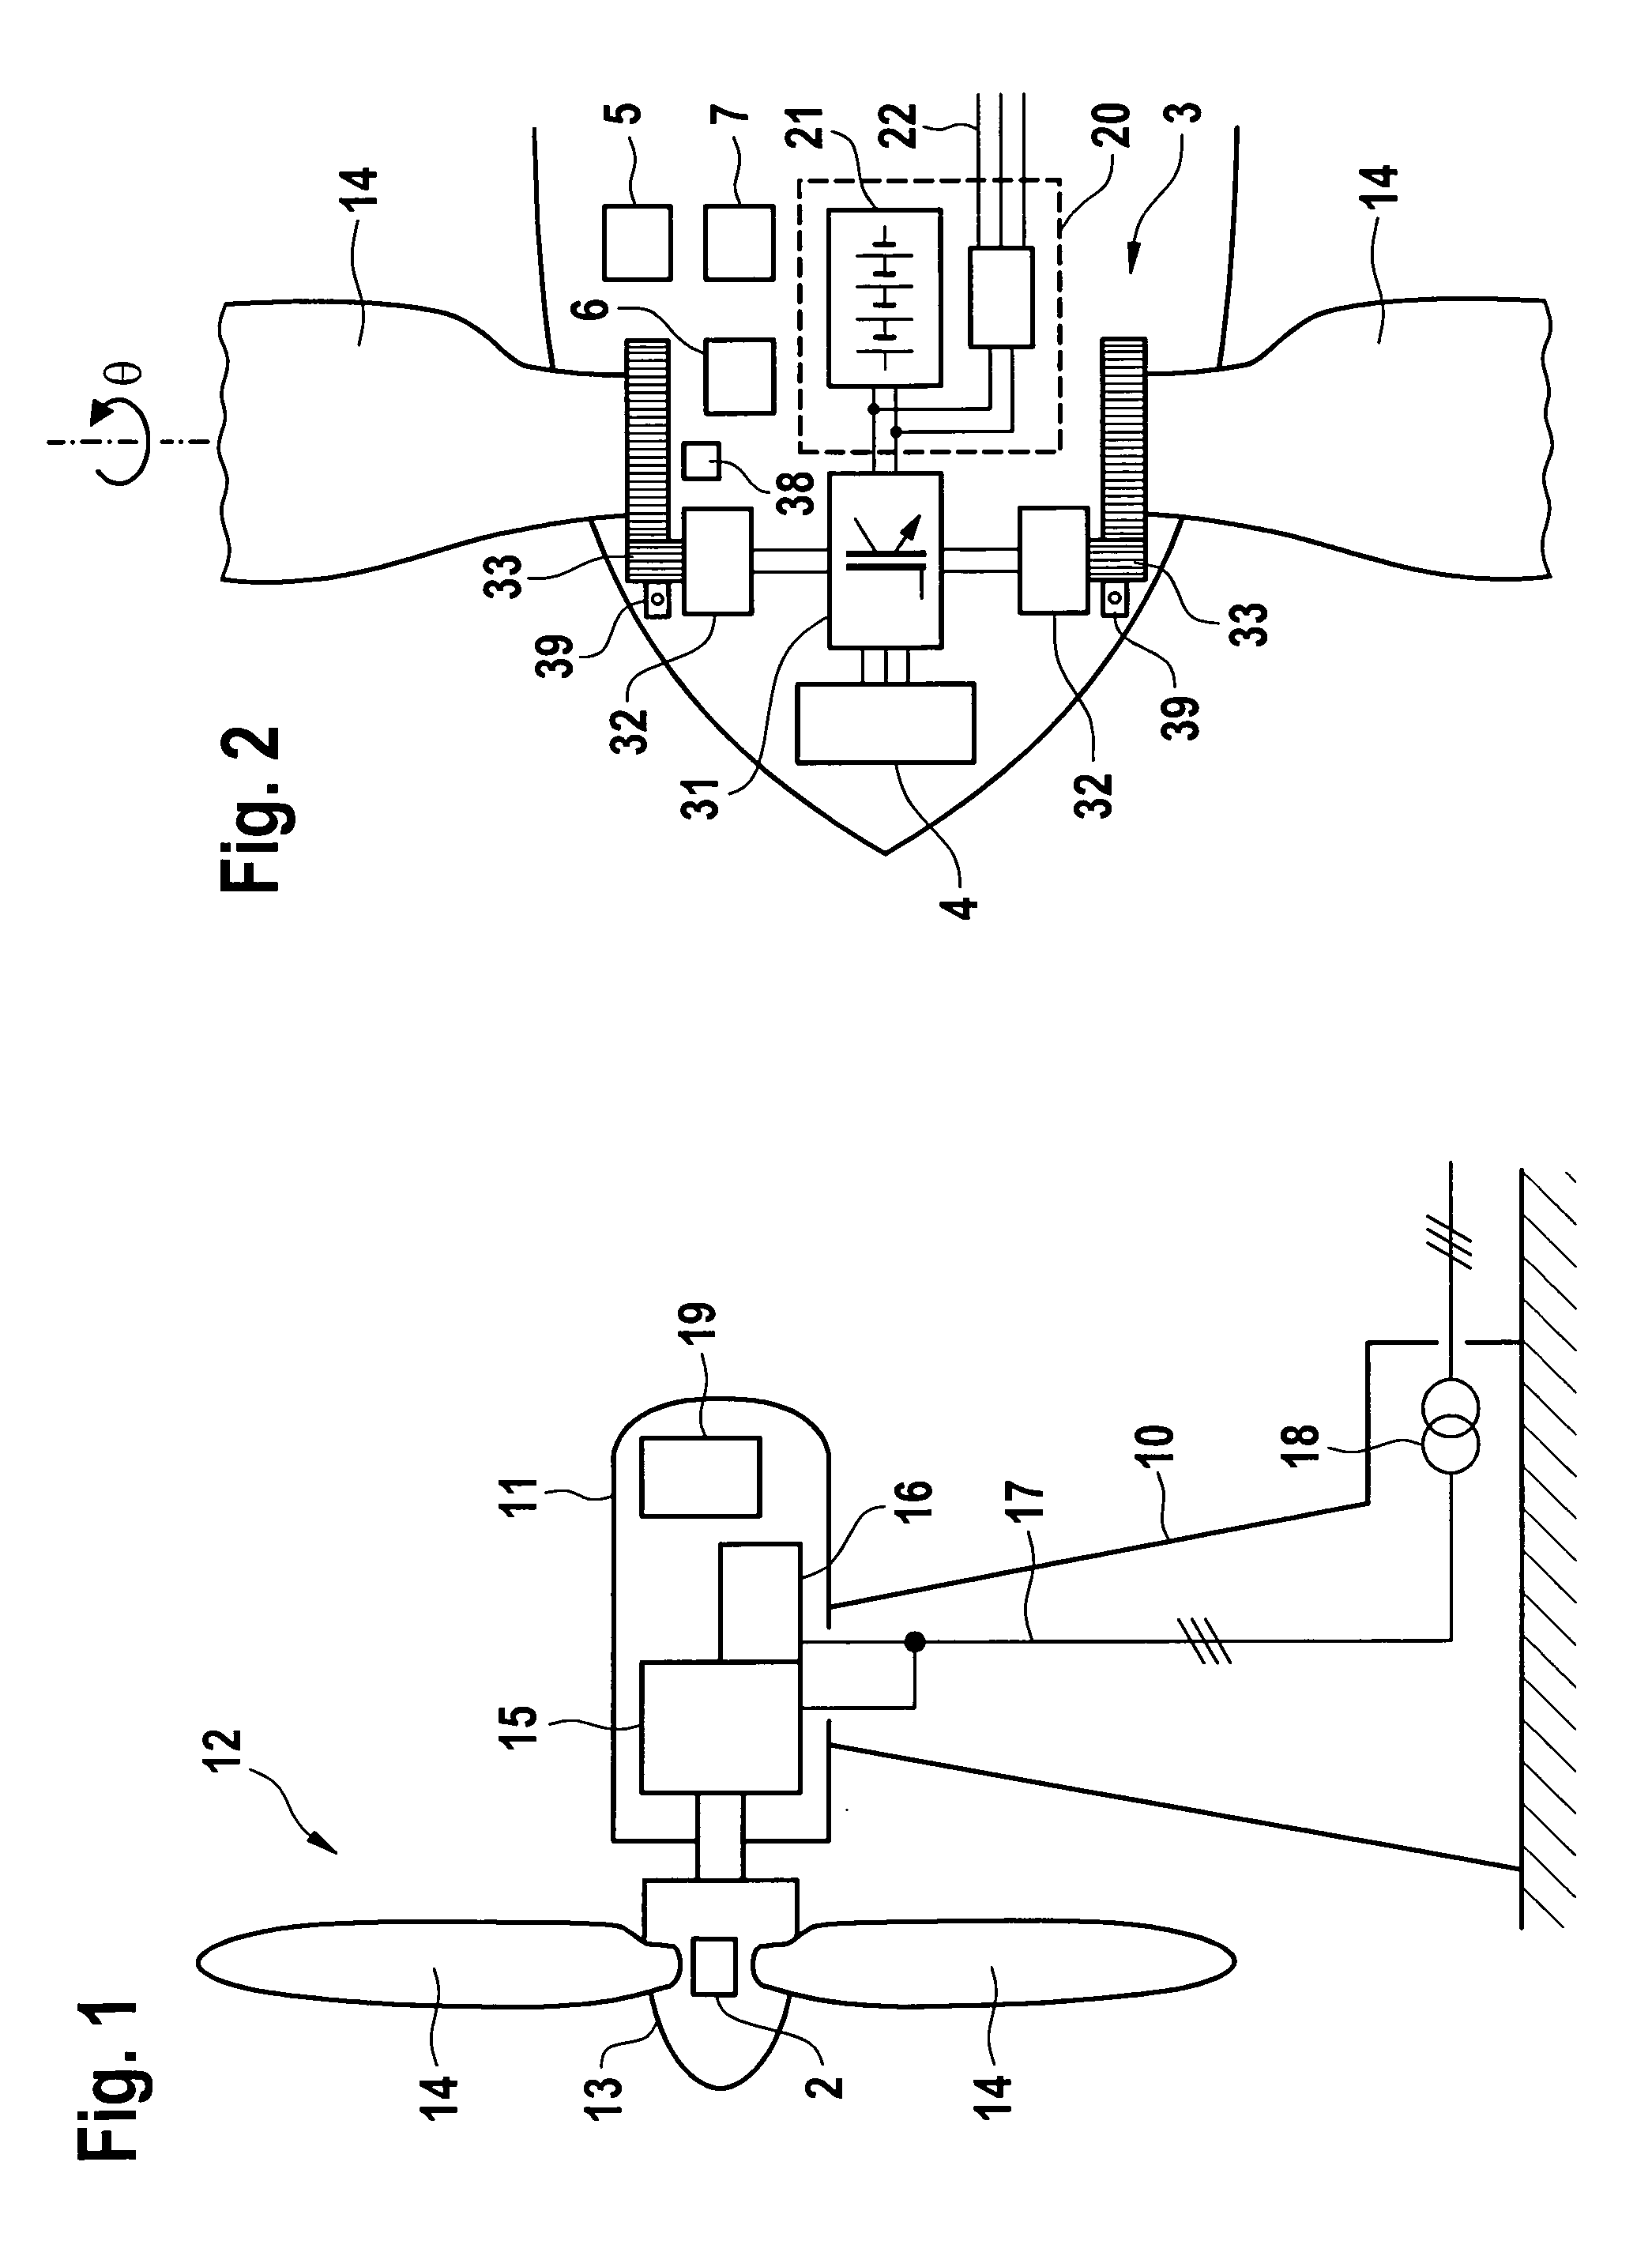 Monitoring device for pitch systems of wind energy systems